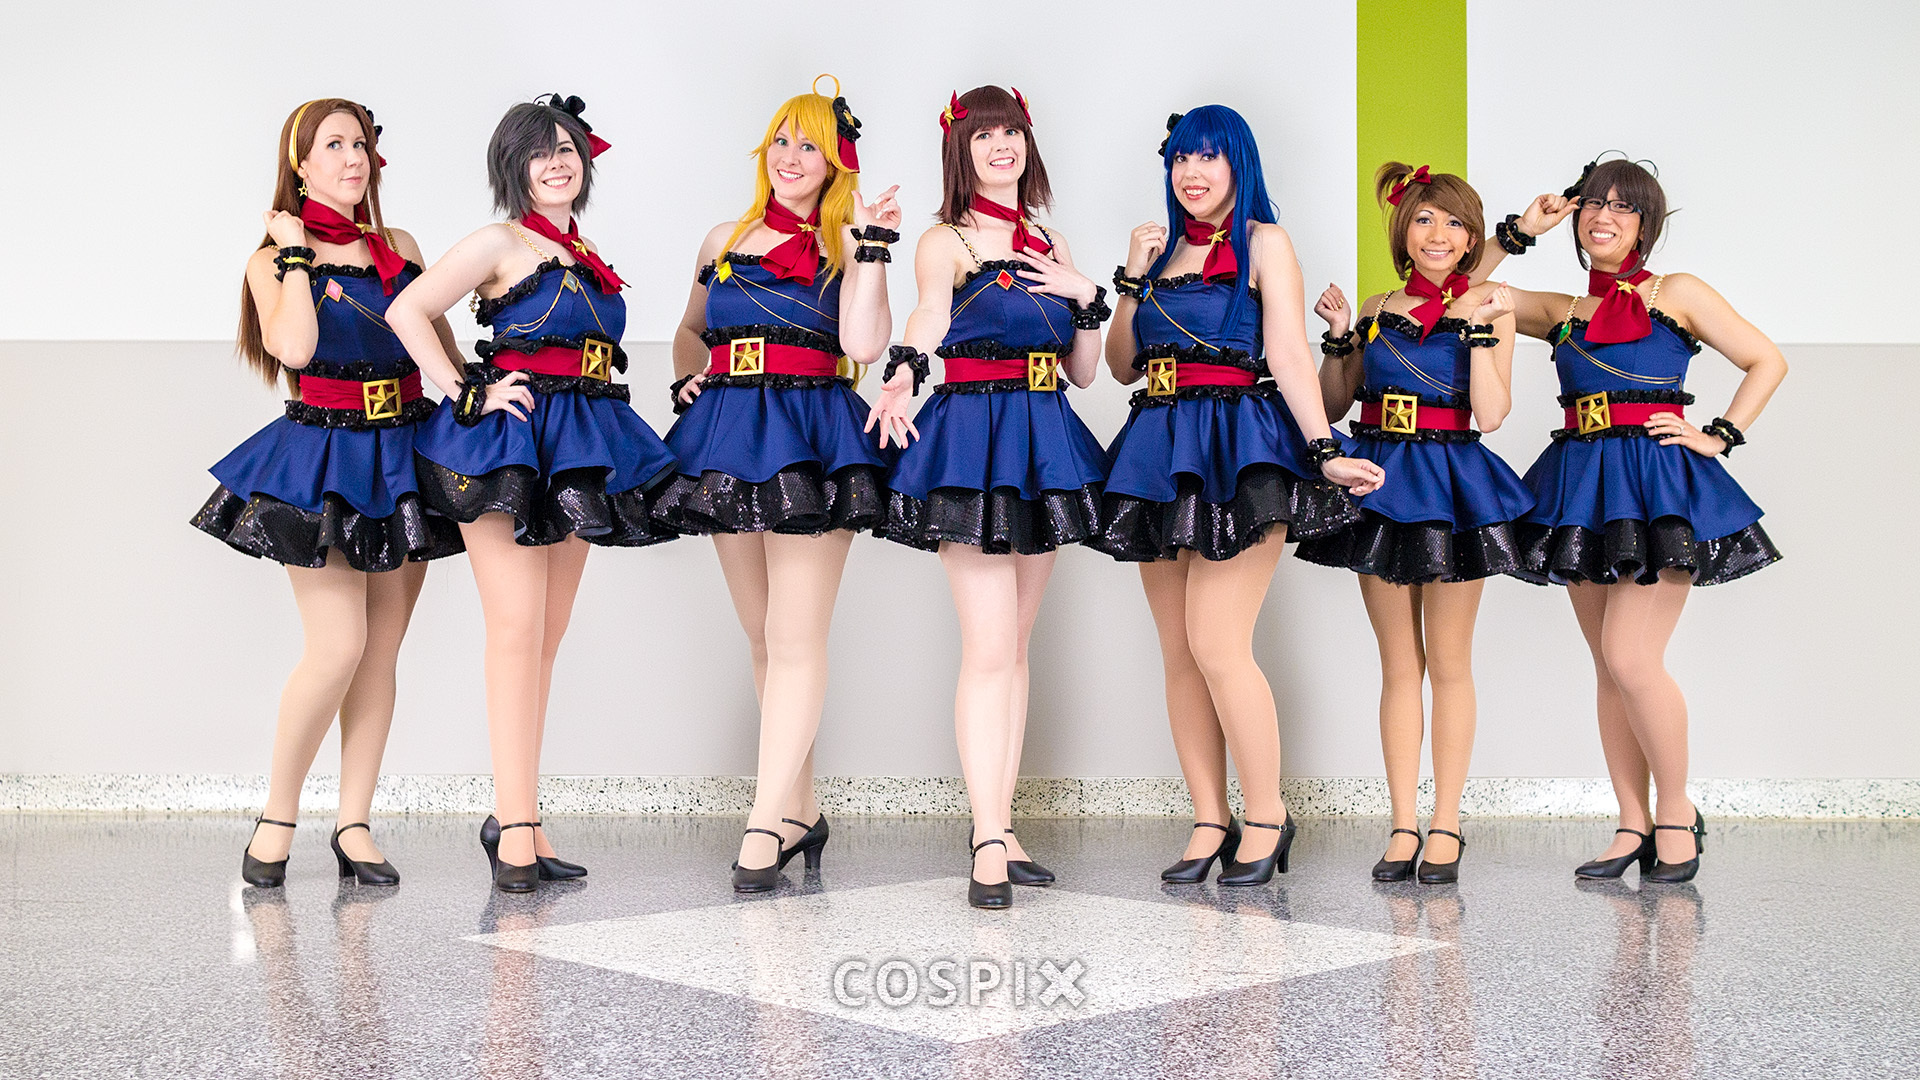 Cospix.net photo featuring NyuNyu Cosplay, Sparkle Pipsi, and DaydreamerNessa